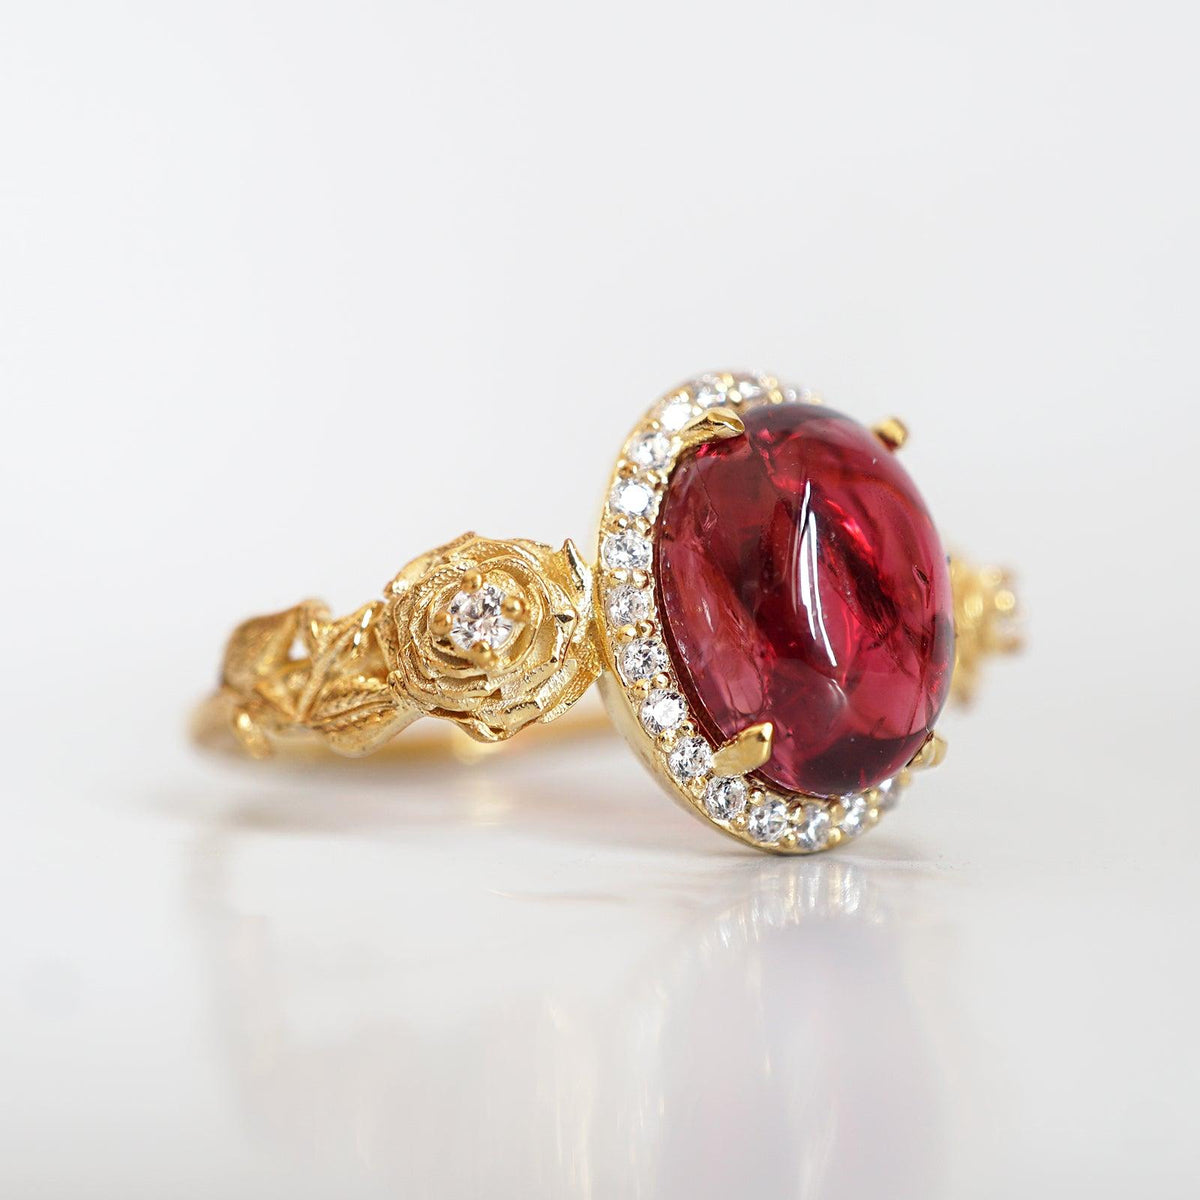 American Beauty Spinel Rose Diamond Ring